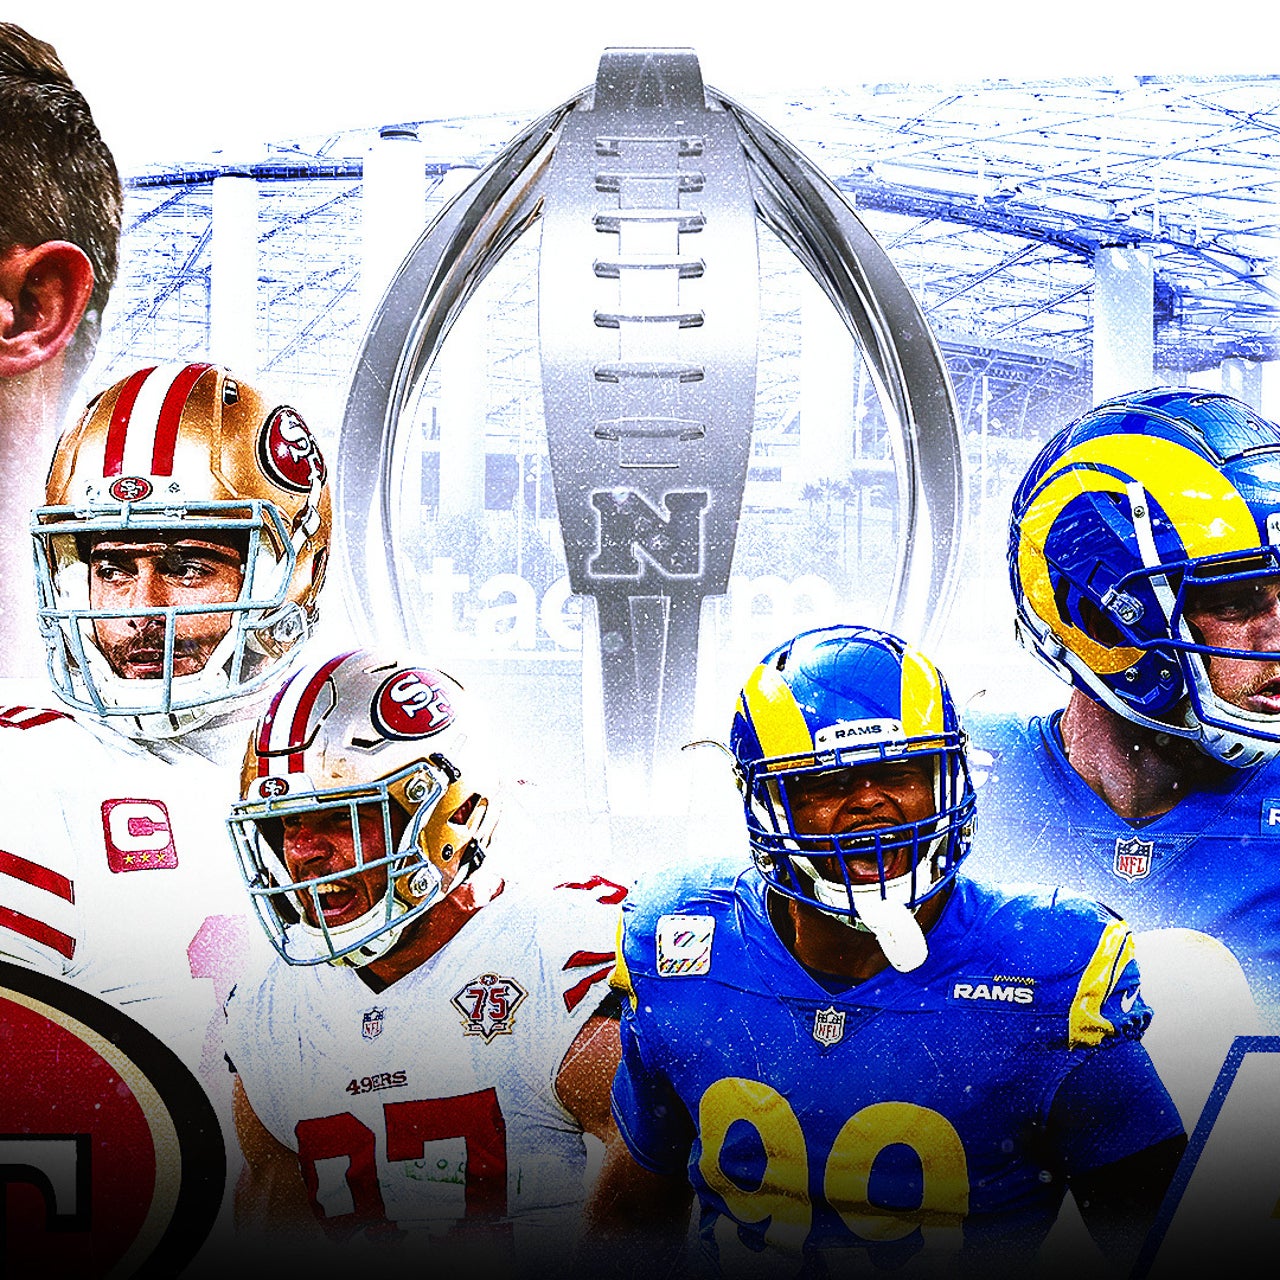 49ers vs. Rams Odds For NFC Championship Game: Analyst Likes SF To